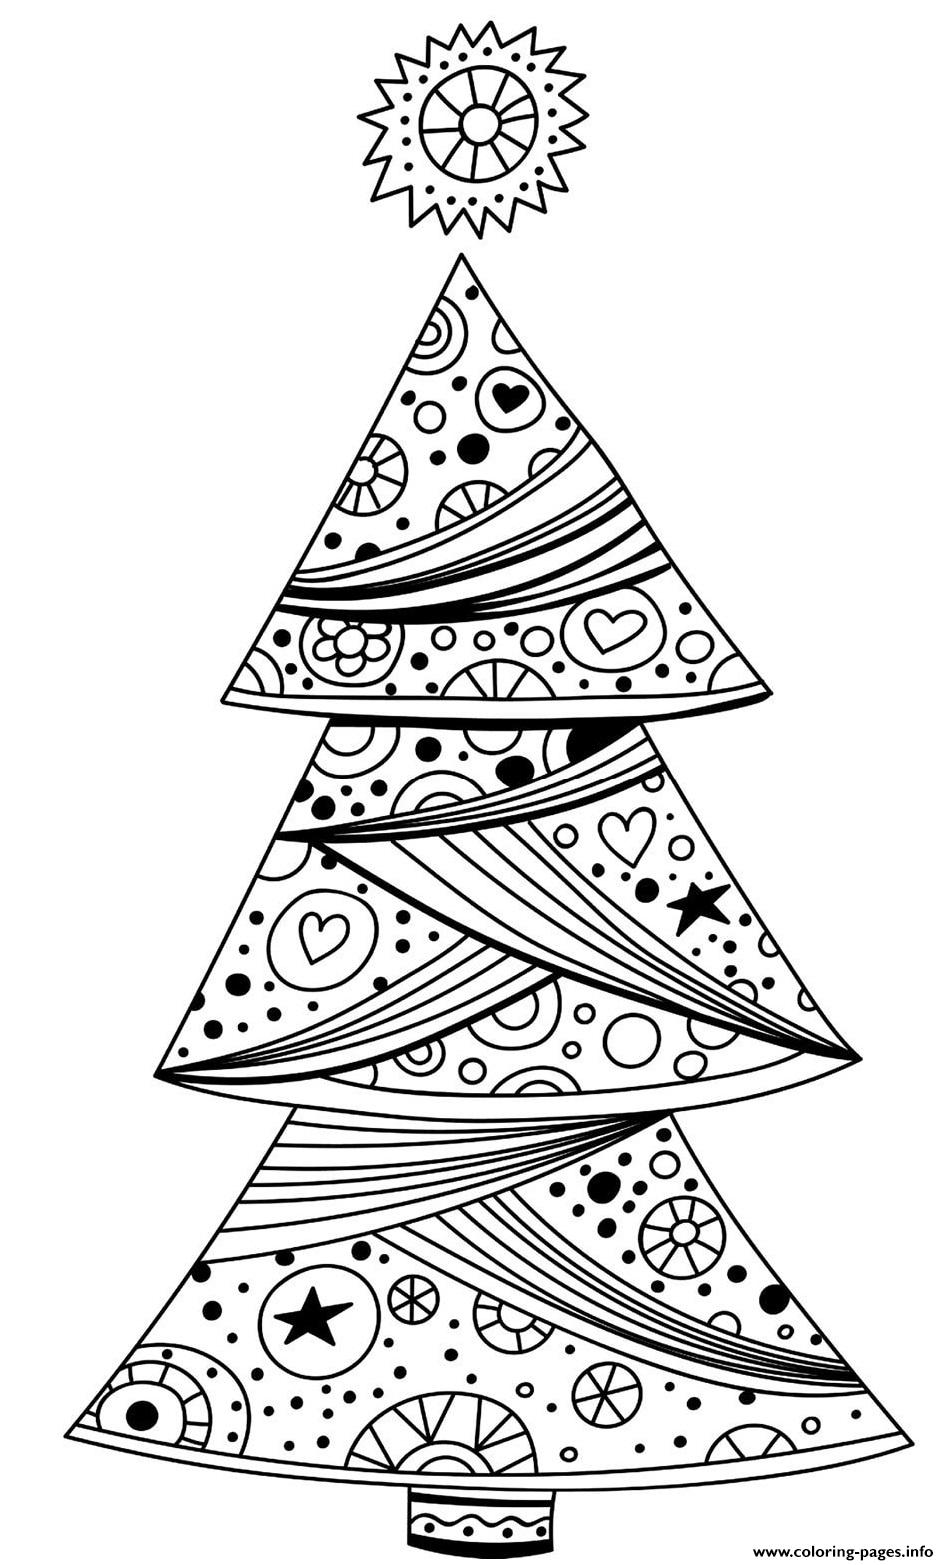 Pretty Decorative Christmas Tree Coloring Pages Printable